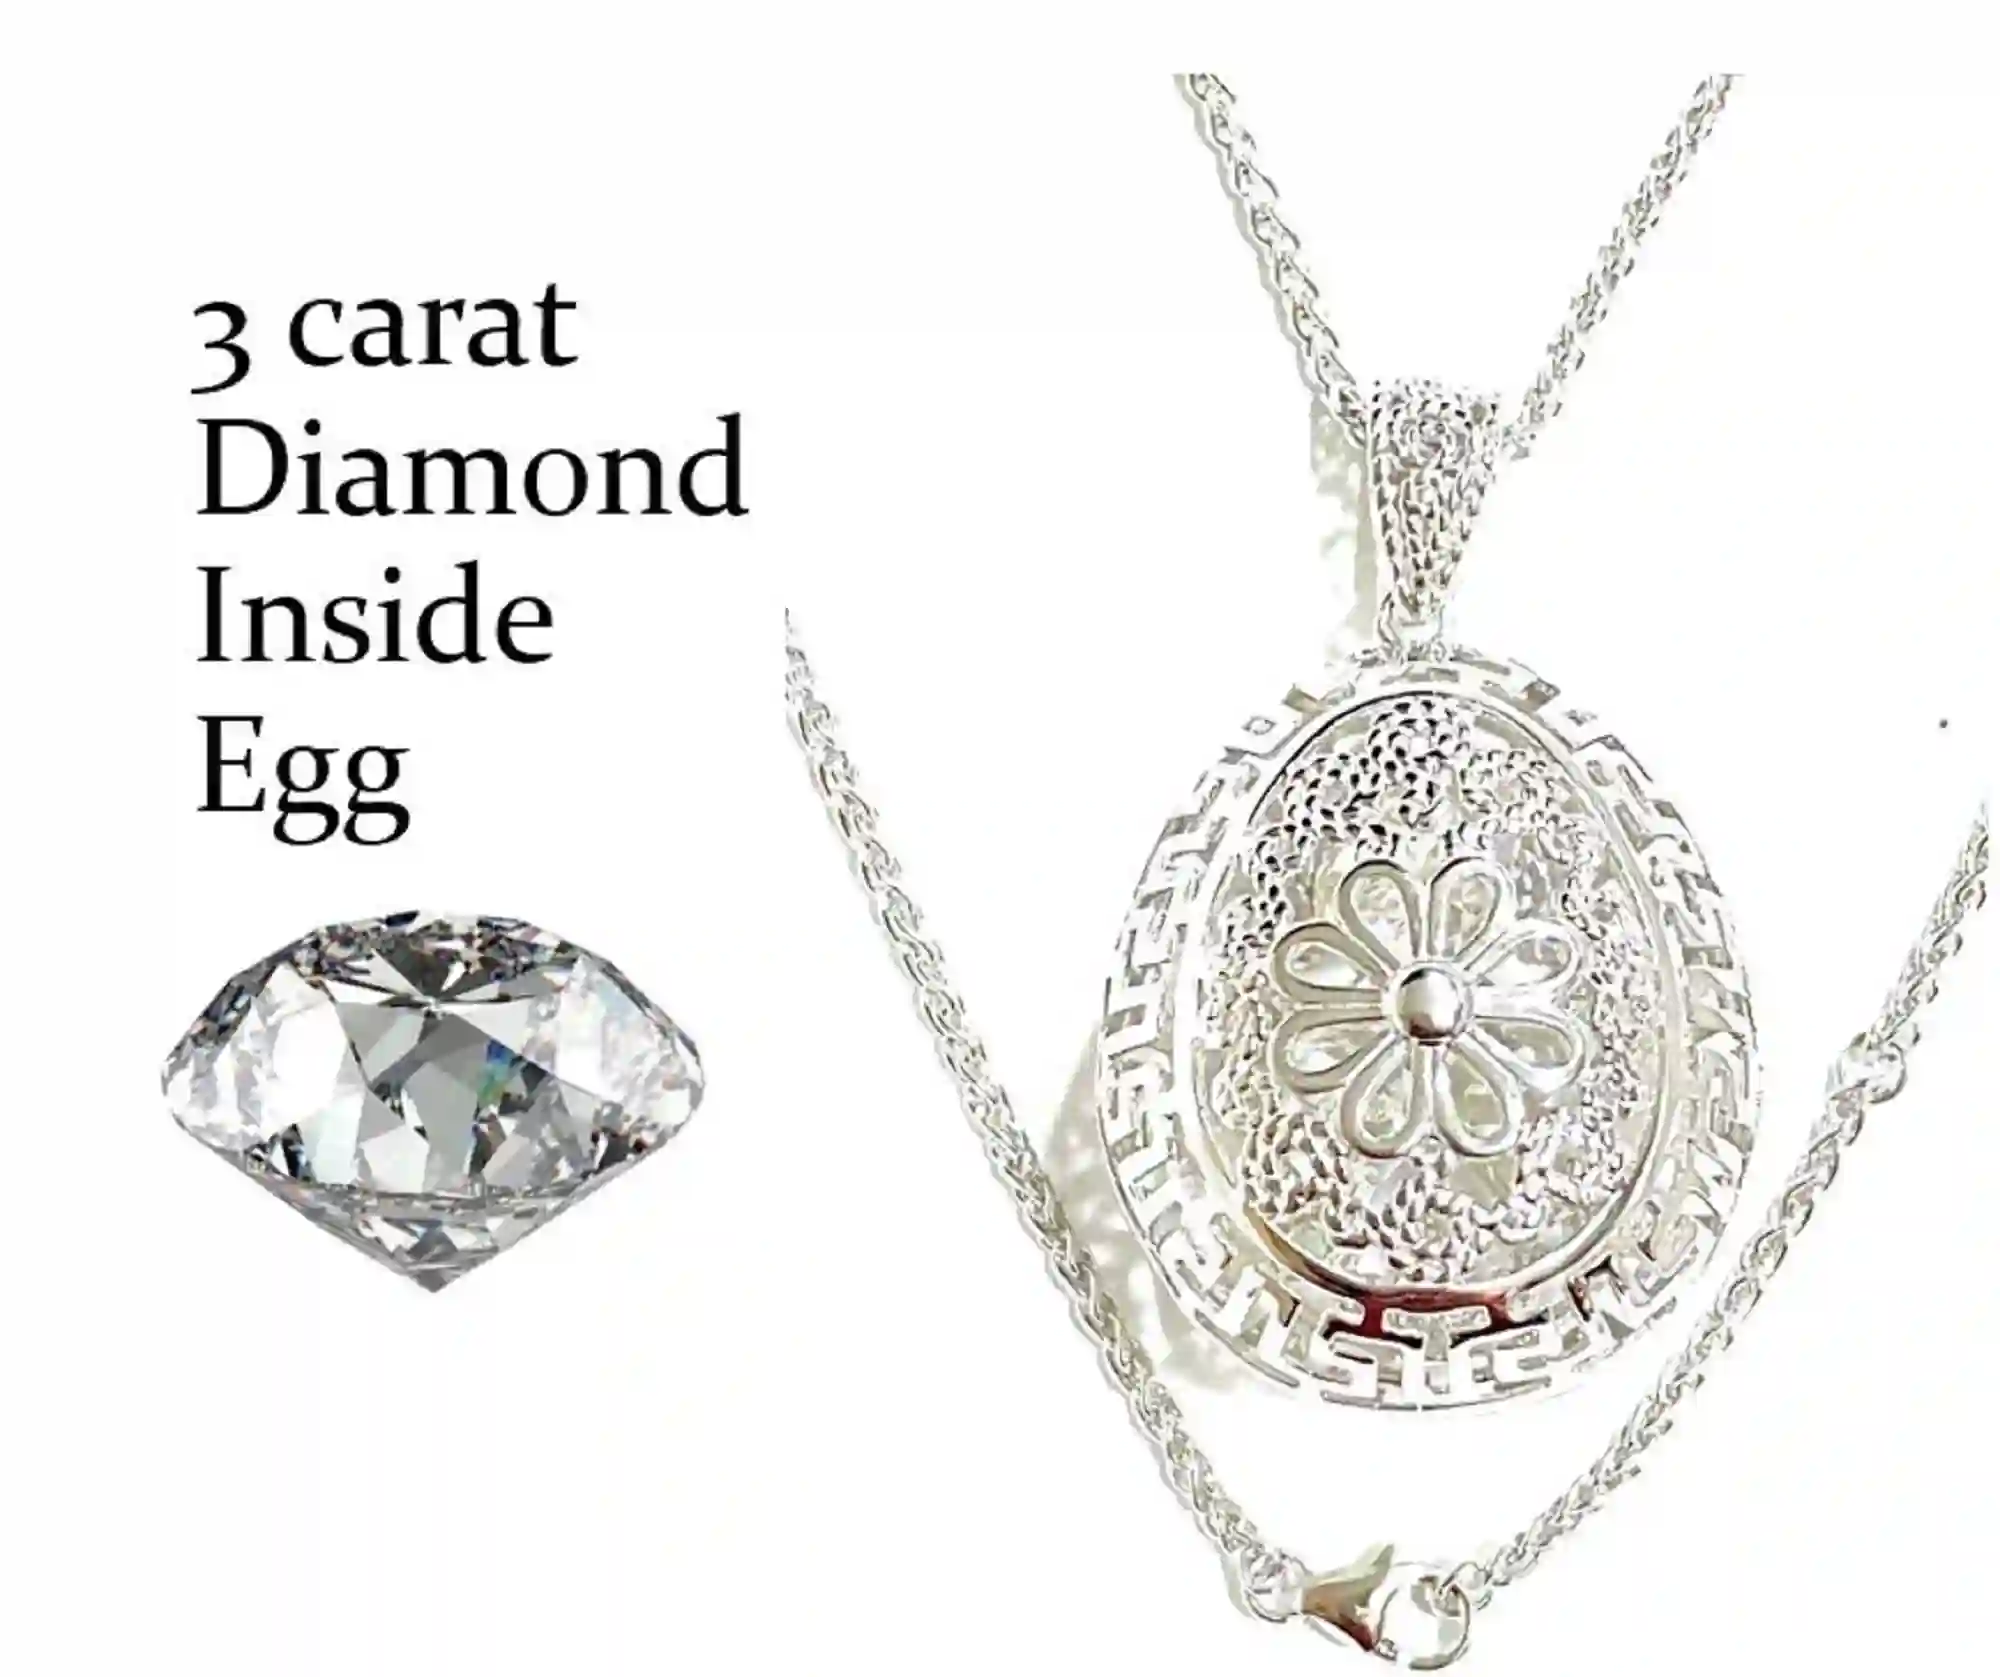 3 ct DIAMOND Handcrafted Jewelry Meander Silver Greek Key Necklace Meander pendant Diamond Necklace Faberge Egg SOLID Sterling SILVER 3carat 